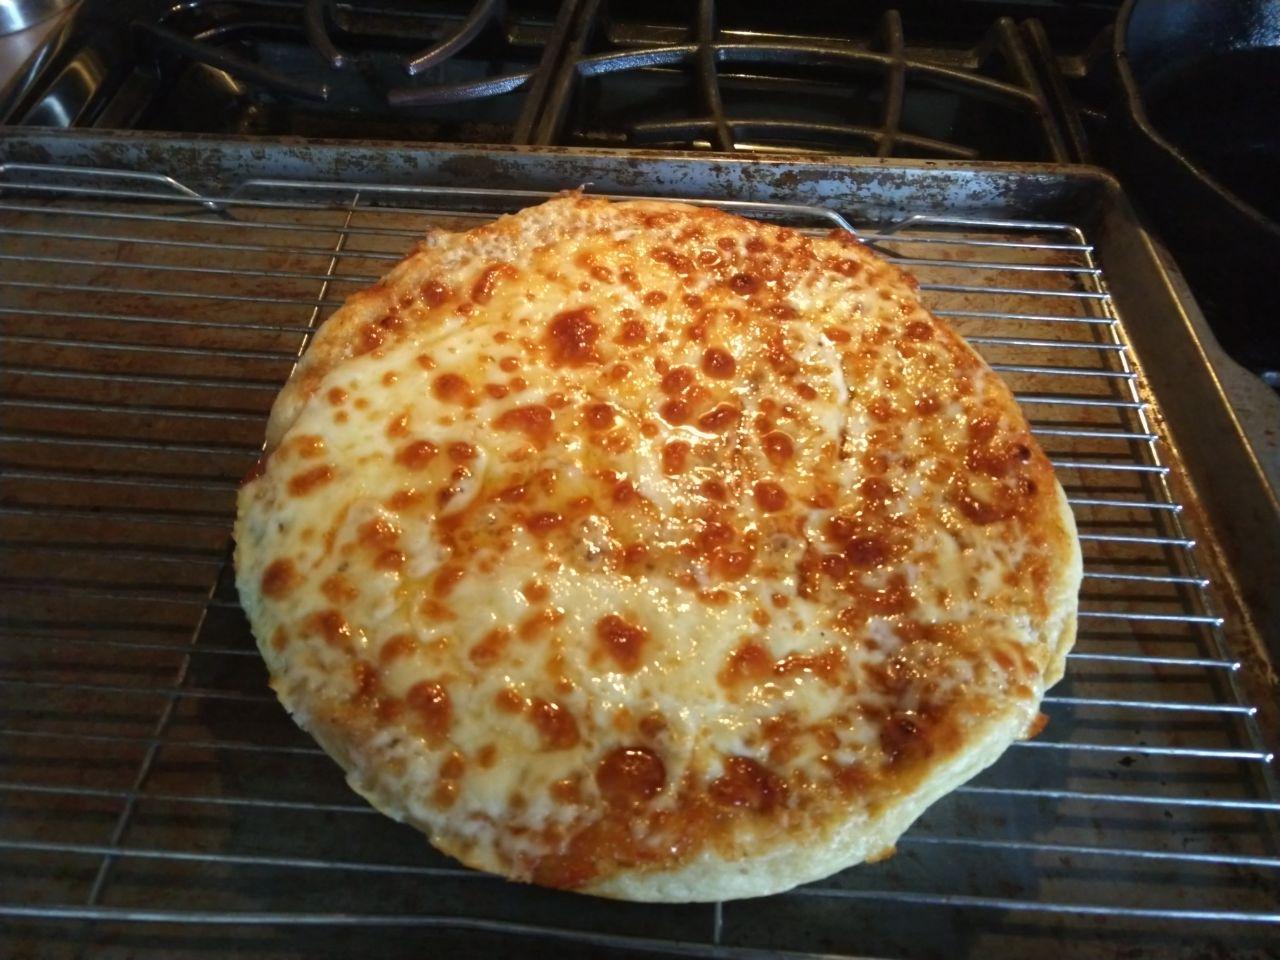 Finished pizza cooling on a rack.